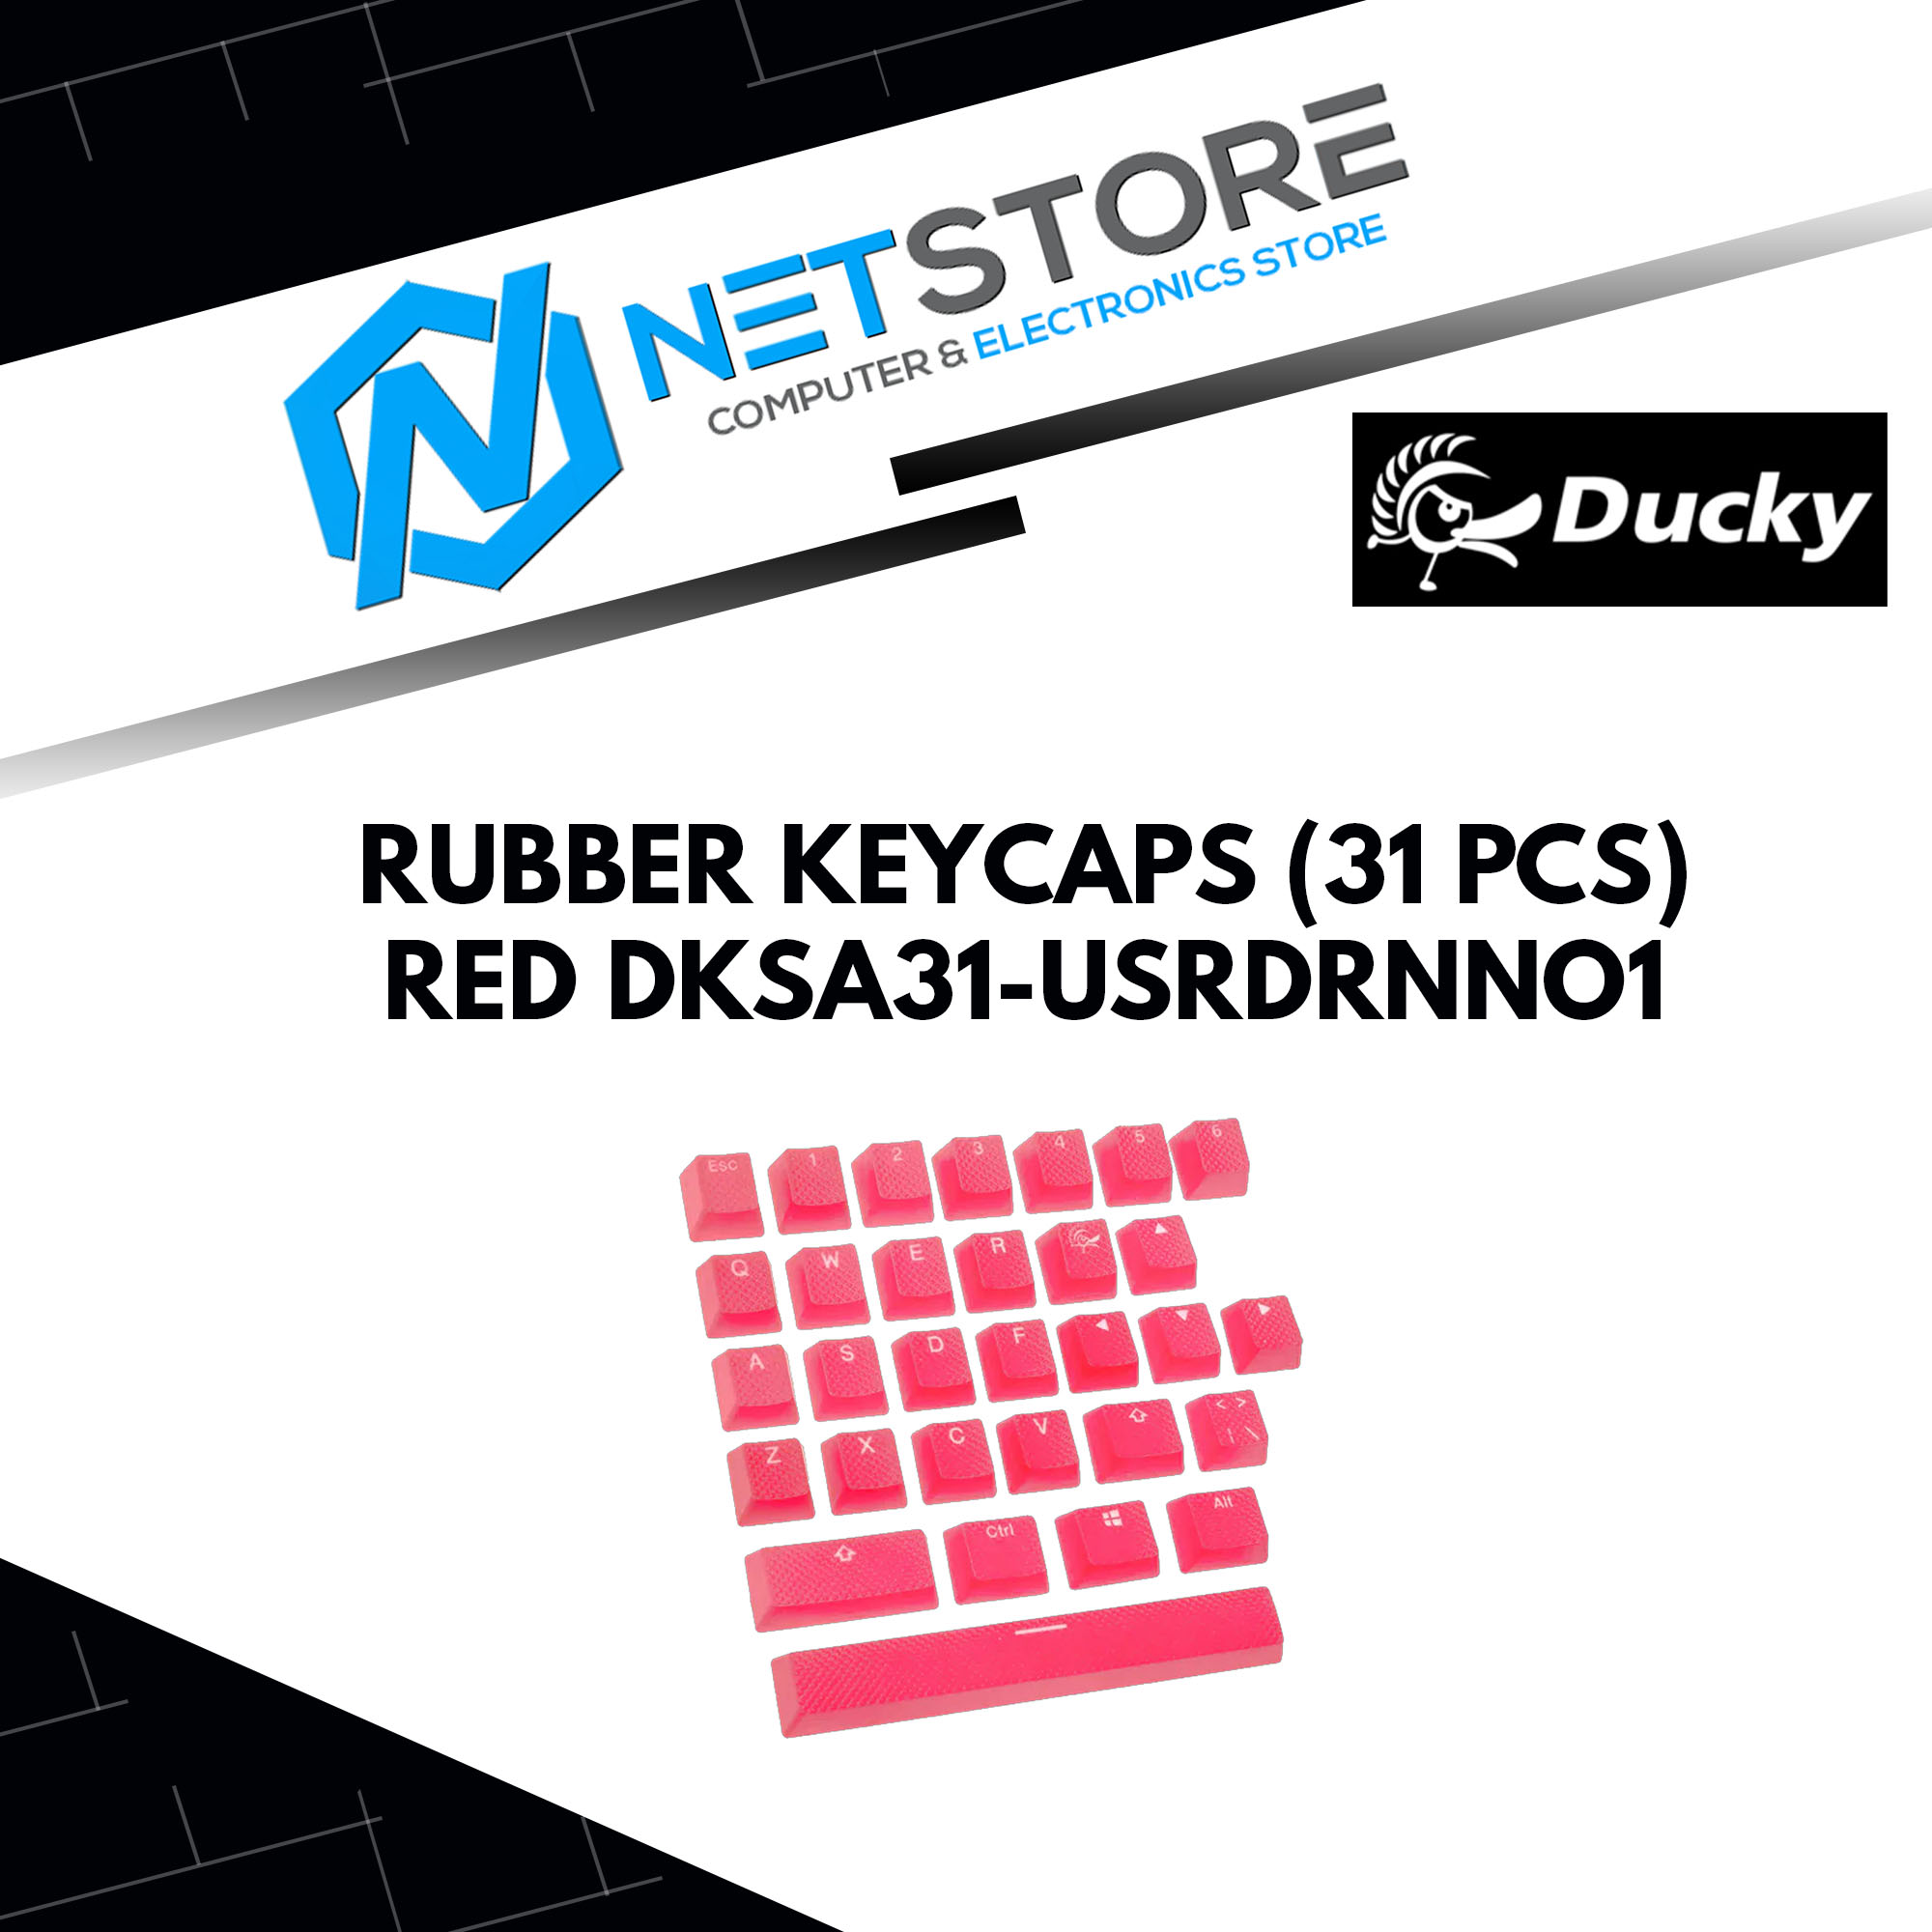 DUCKY RUBBER KEYCAPS (31 PCS) - RED DKSA31-USRDRNNO1